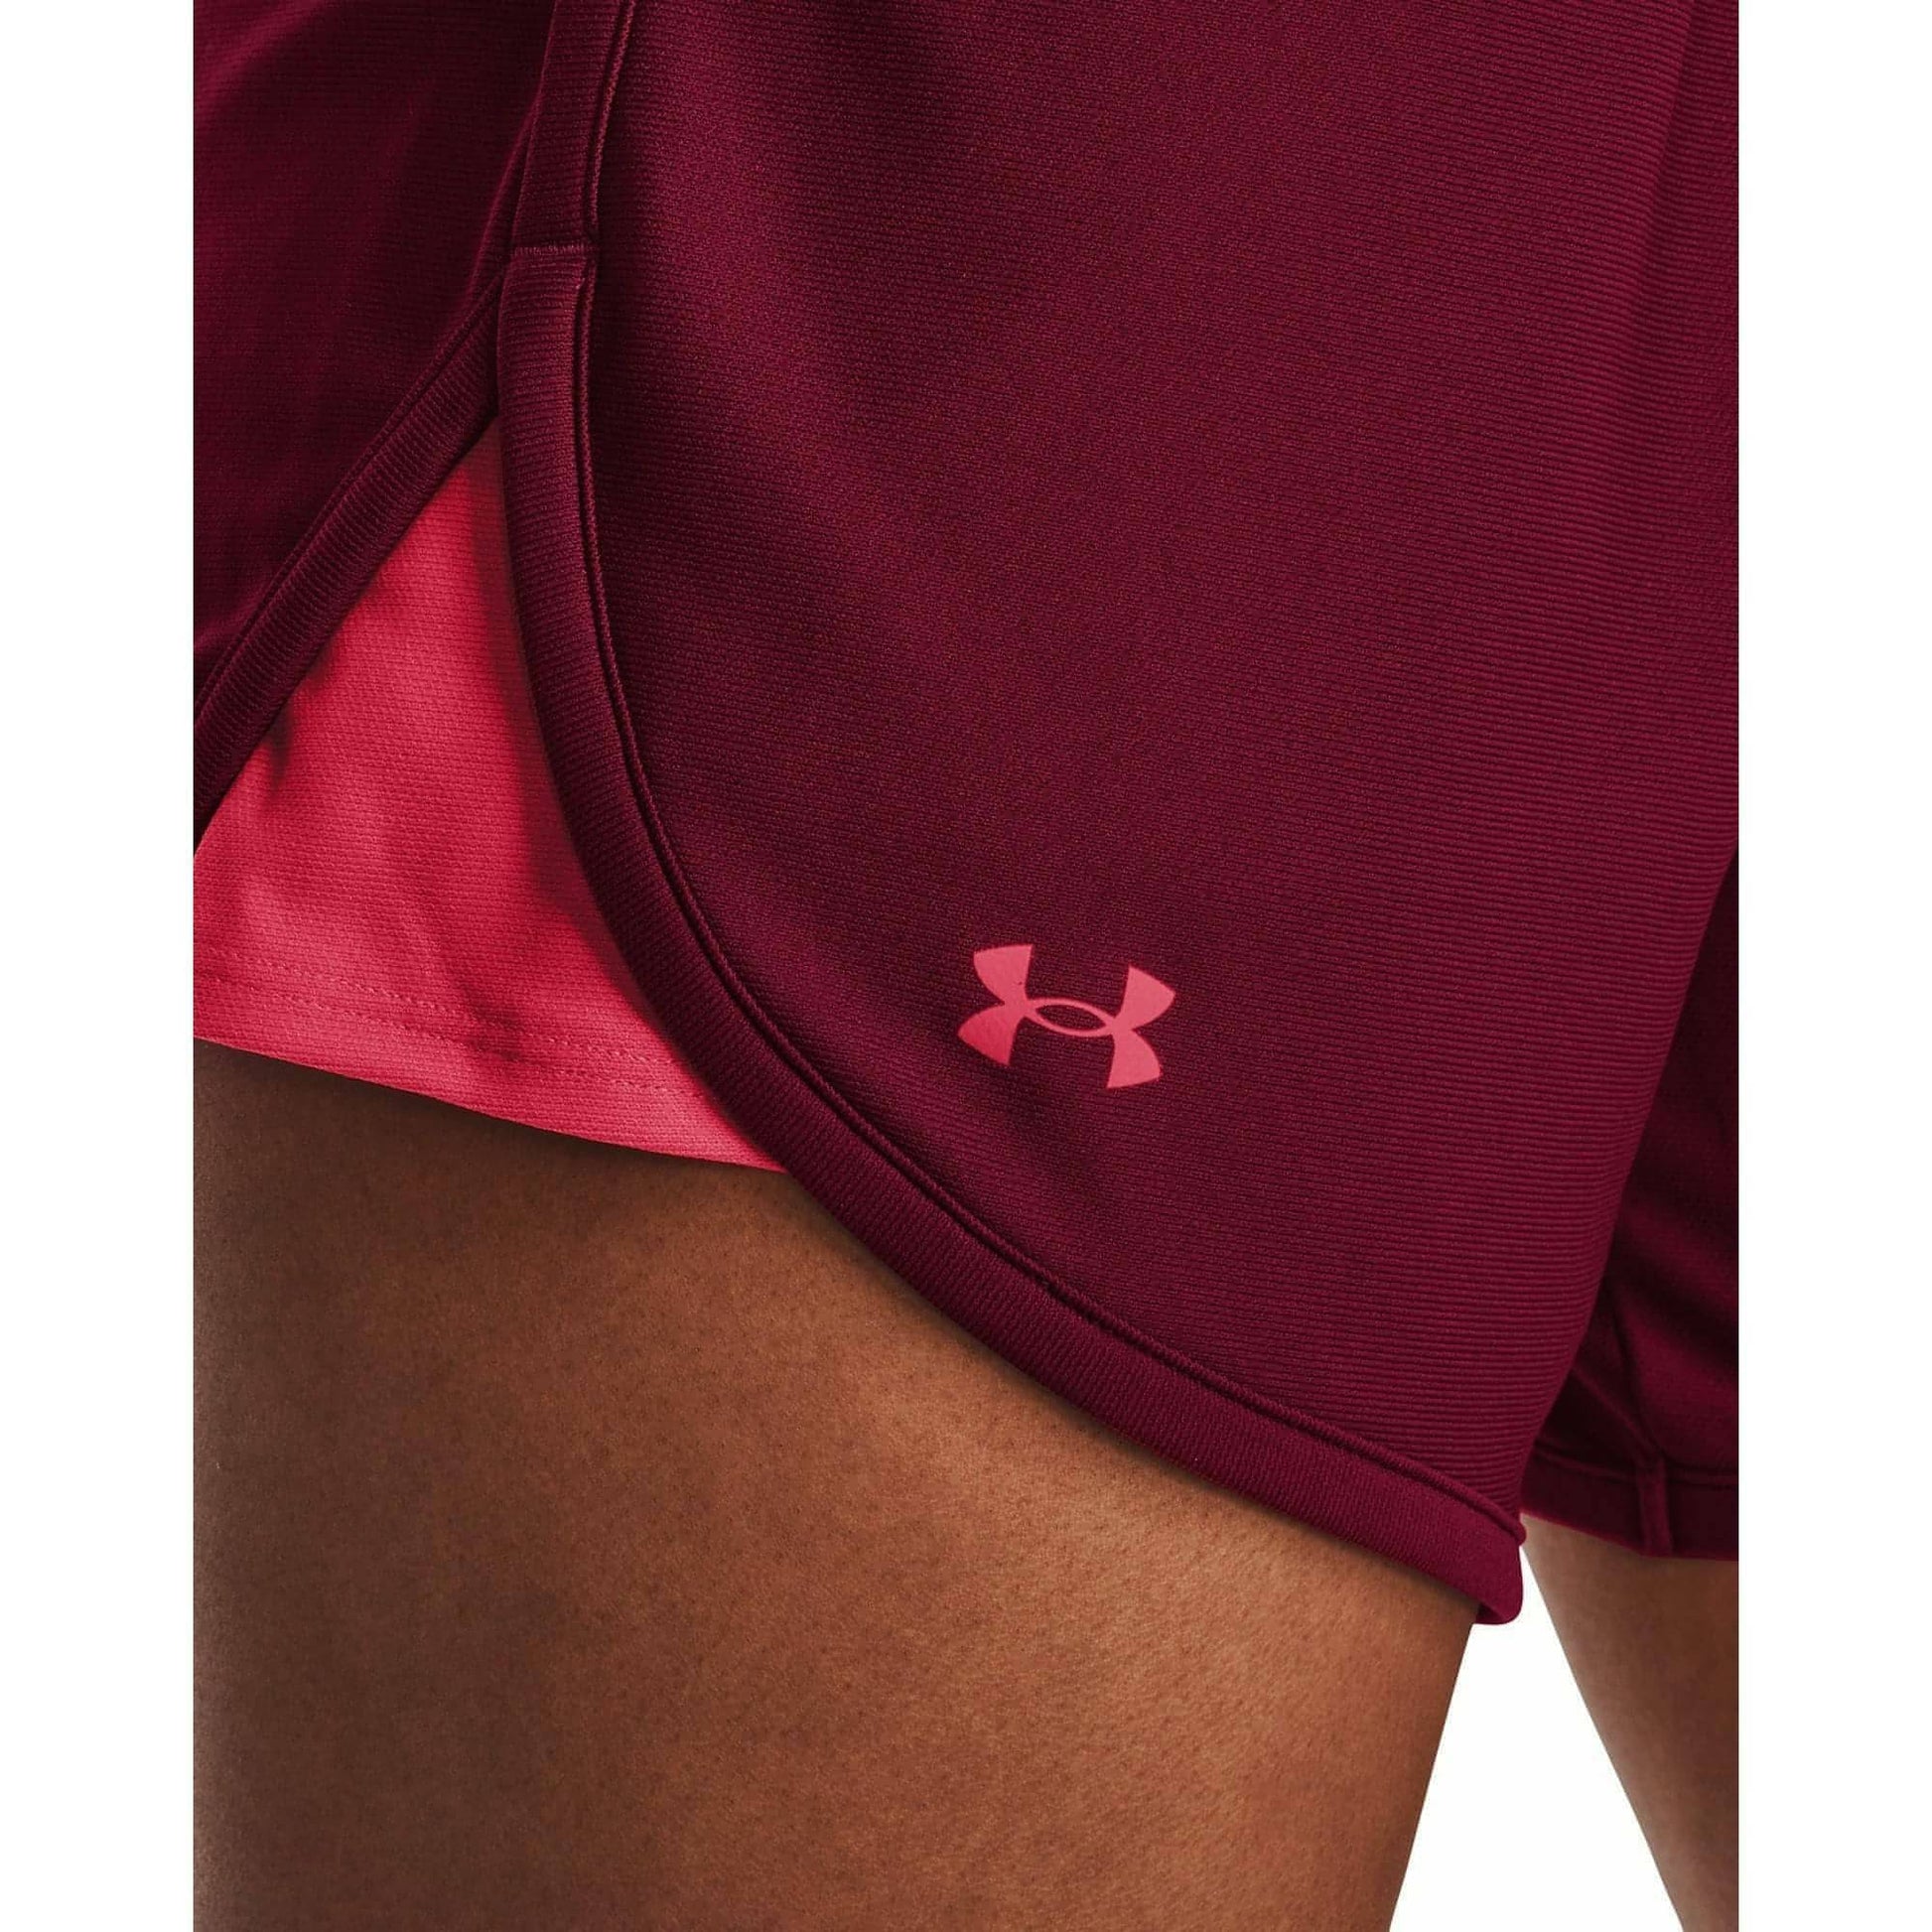 Under Armour Play Up 5 Inch Womens Training Shorts - Pink - Start Fitness